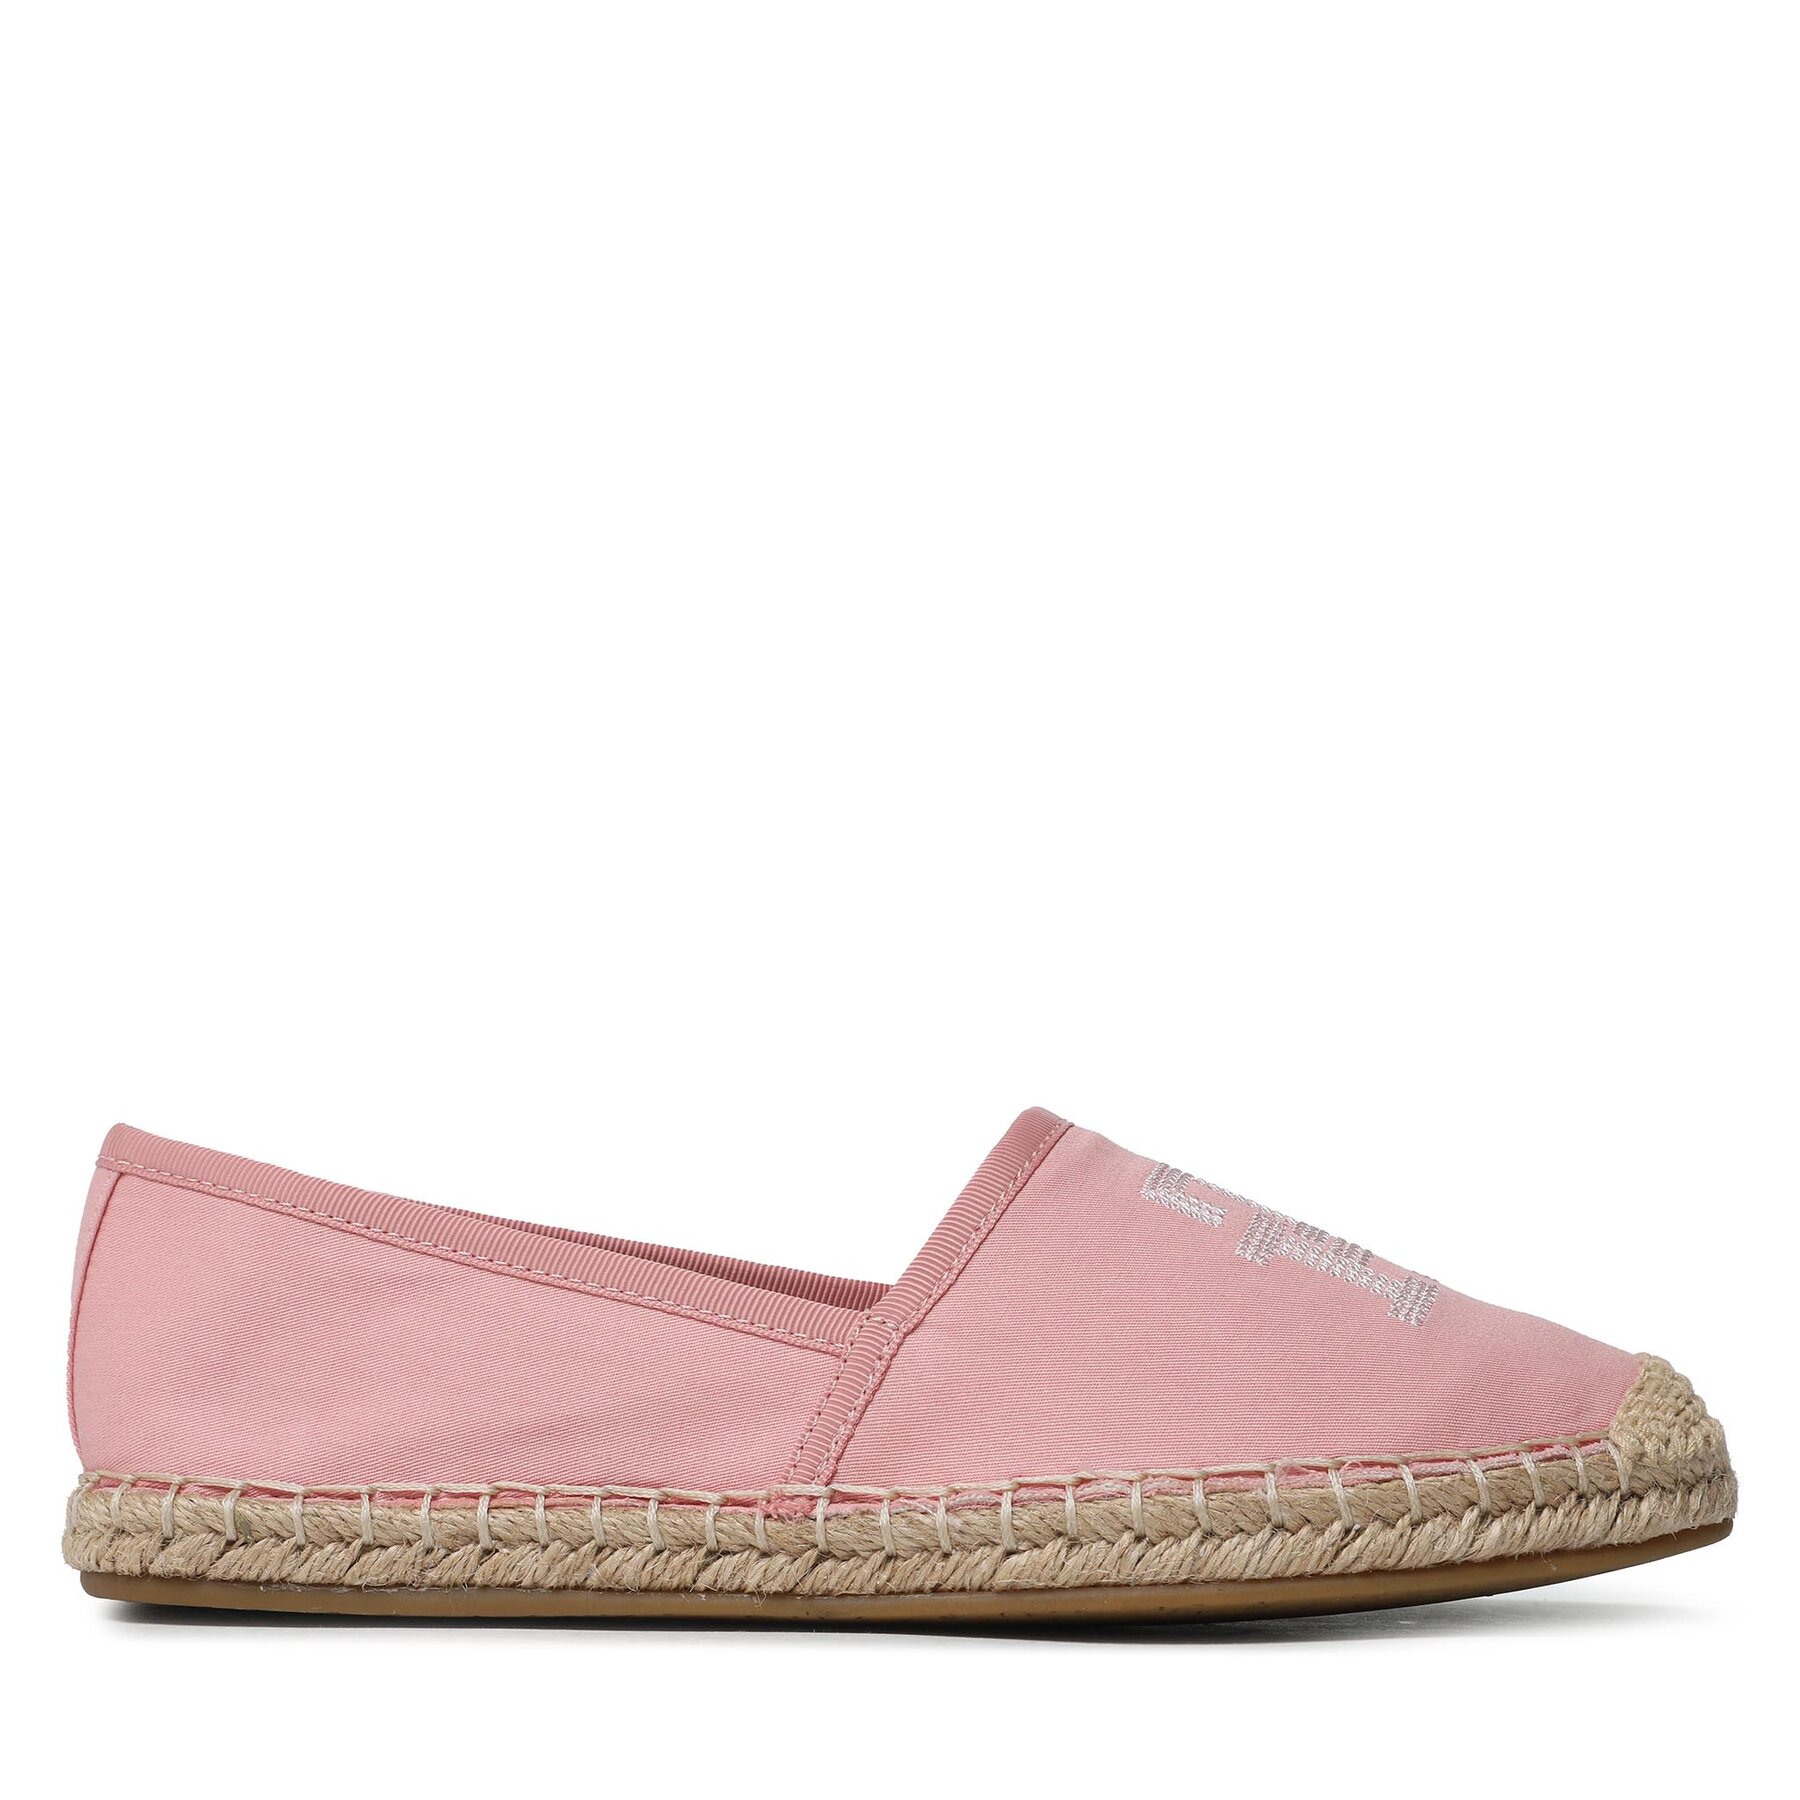 Tommy Hilfiger Espadrillas Embroidered (FW0FW07101) soothing pink